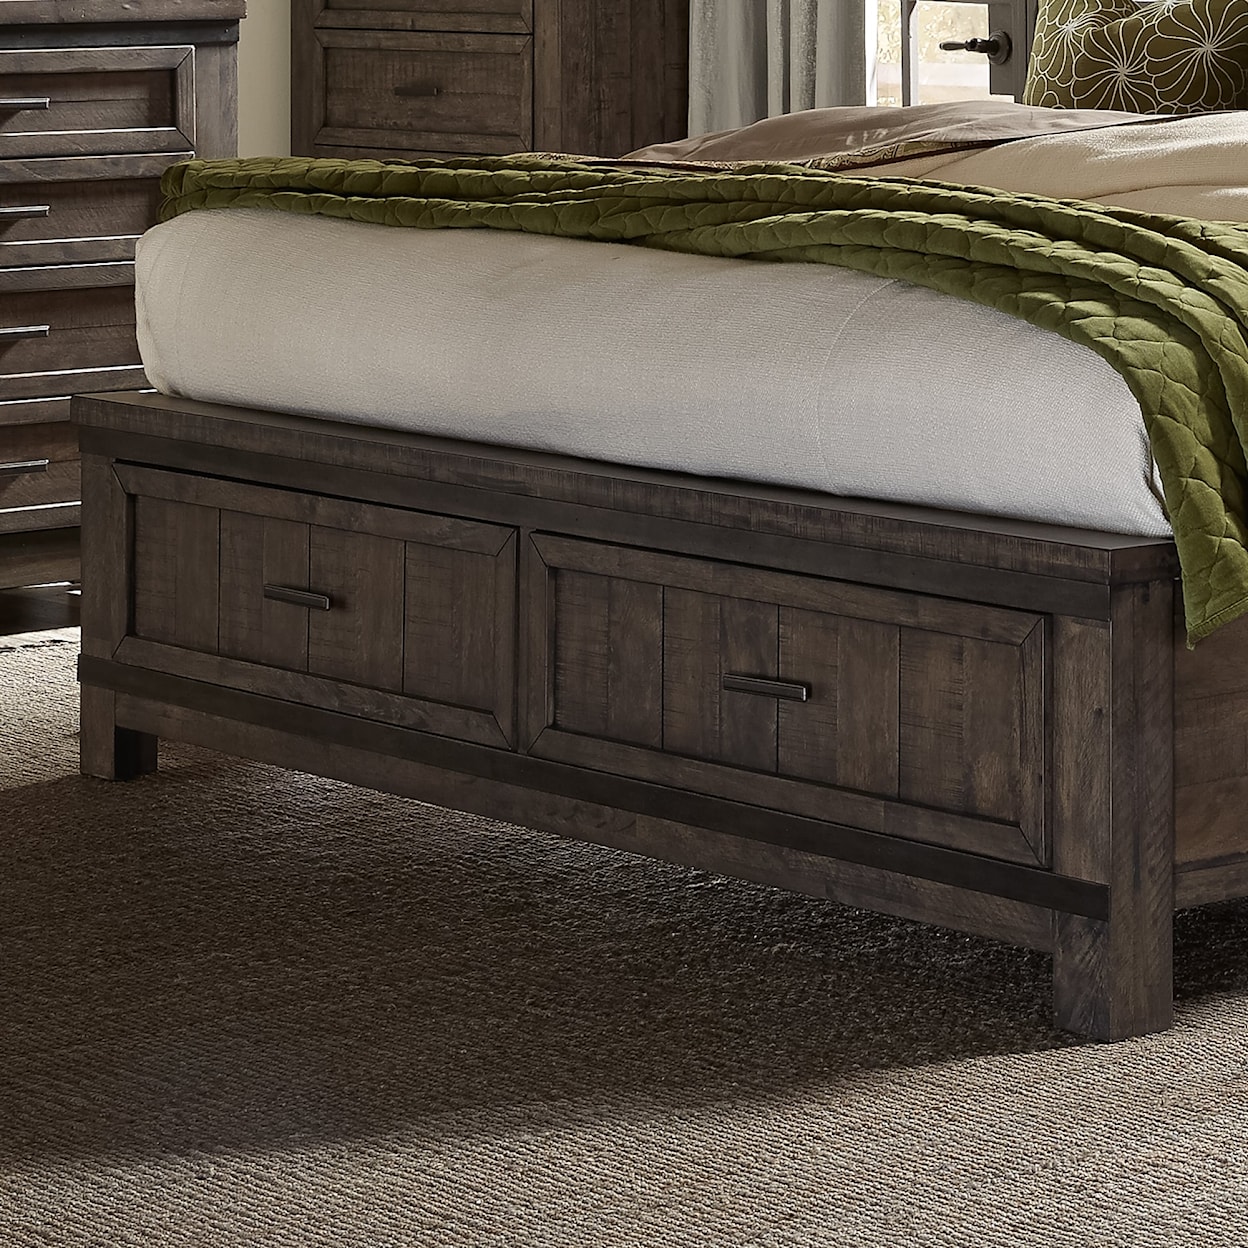 Libby Thornwood Hills 2-Drawer Queen Storage Bed